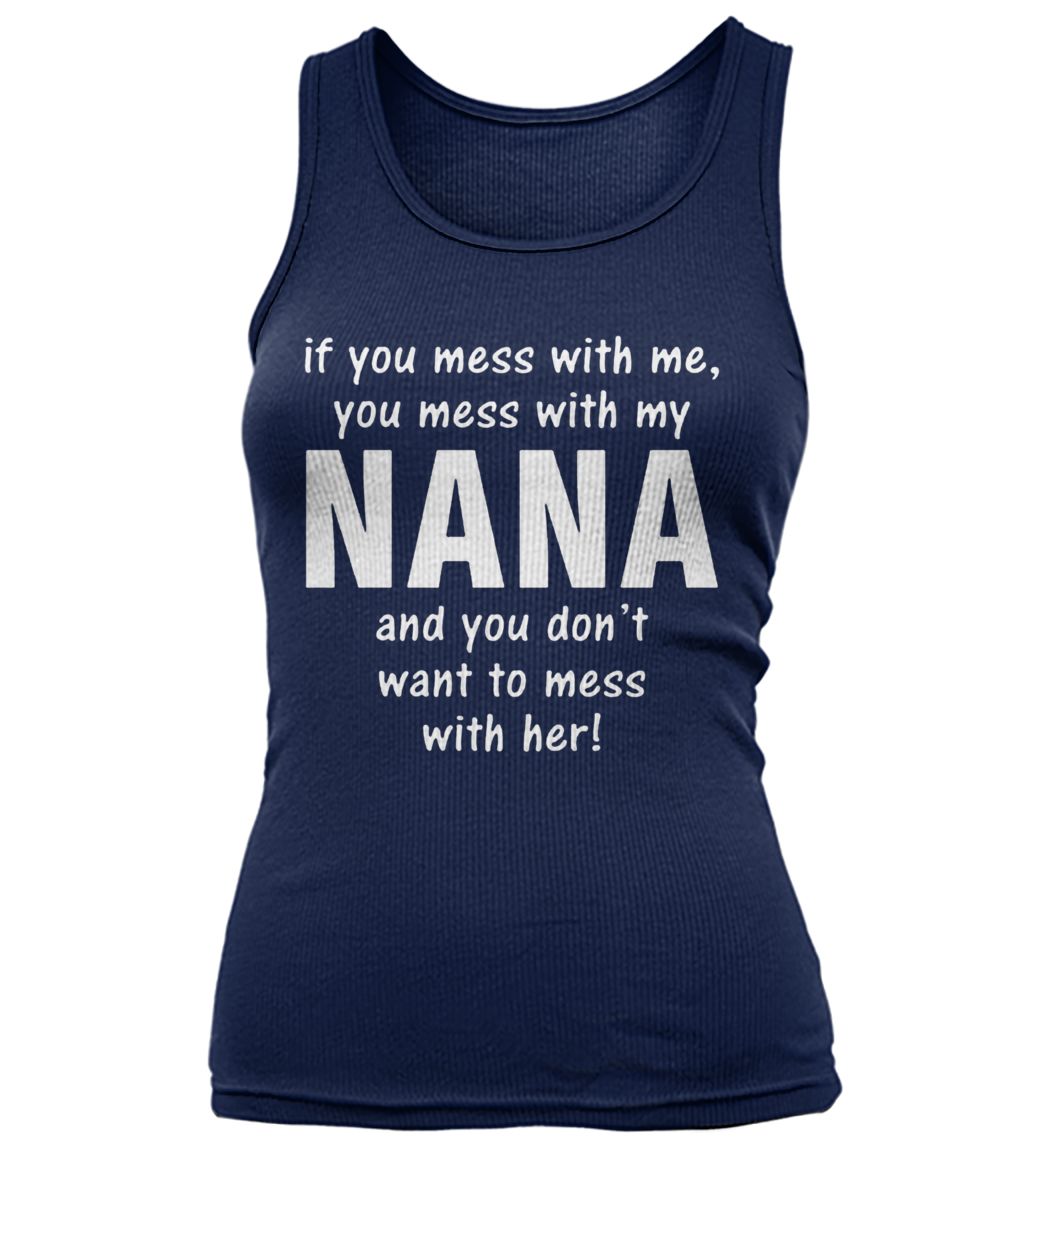 If you mess with me you mess with my nana women's tank top